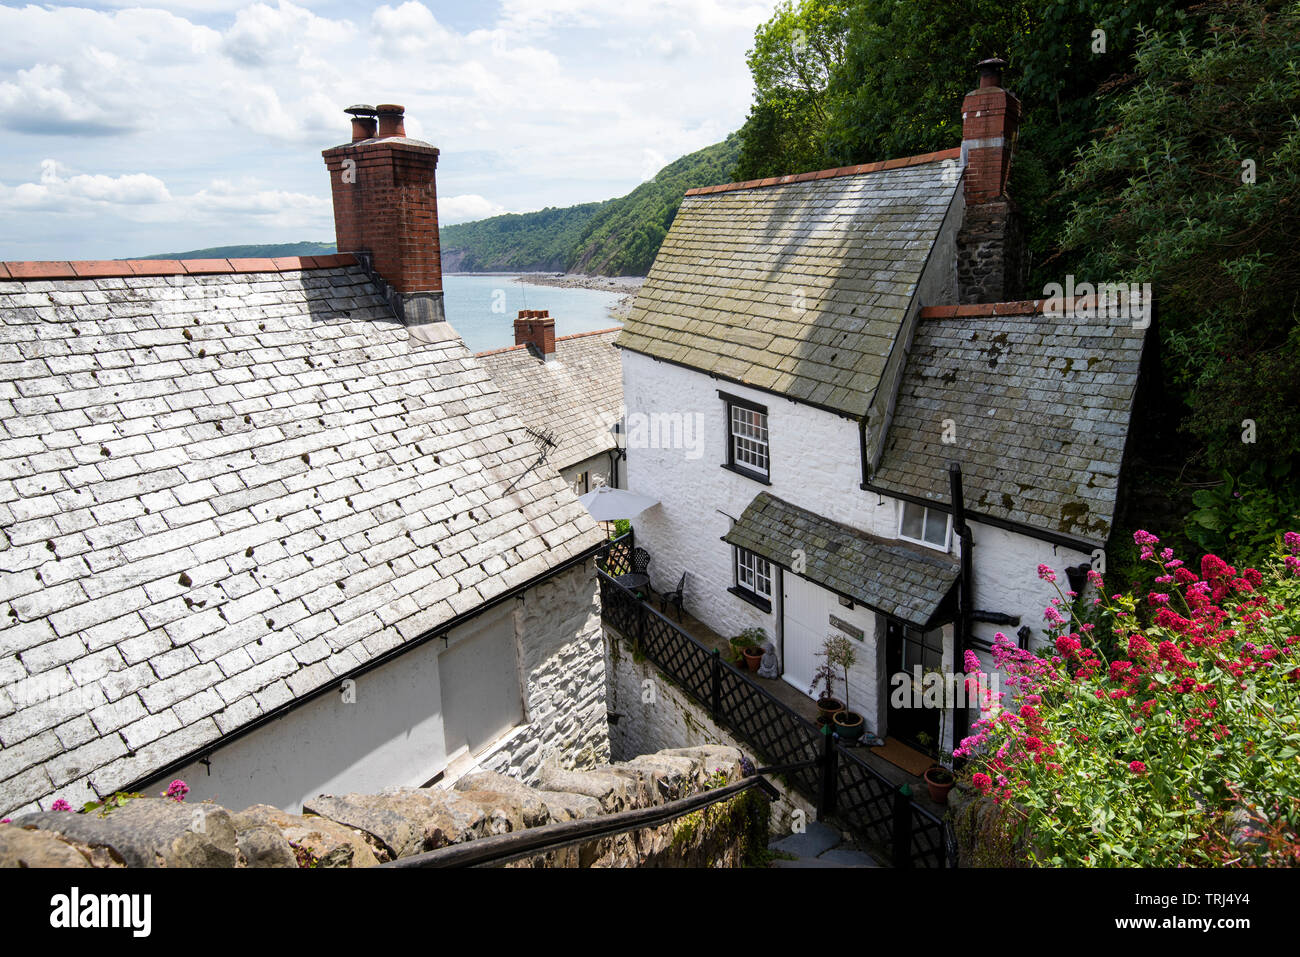 Looking down over rooftops and Bideford Bay in Clovelly, Devon England UK Stock Photo